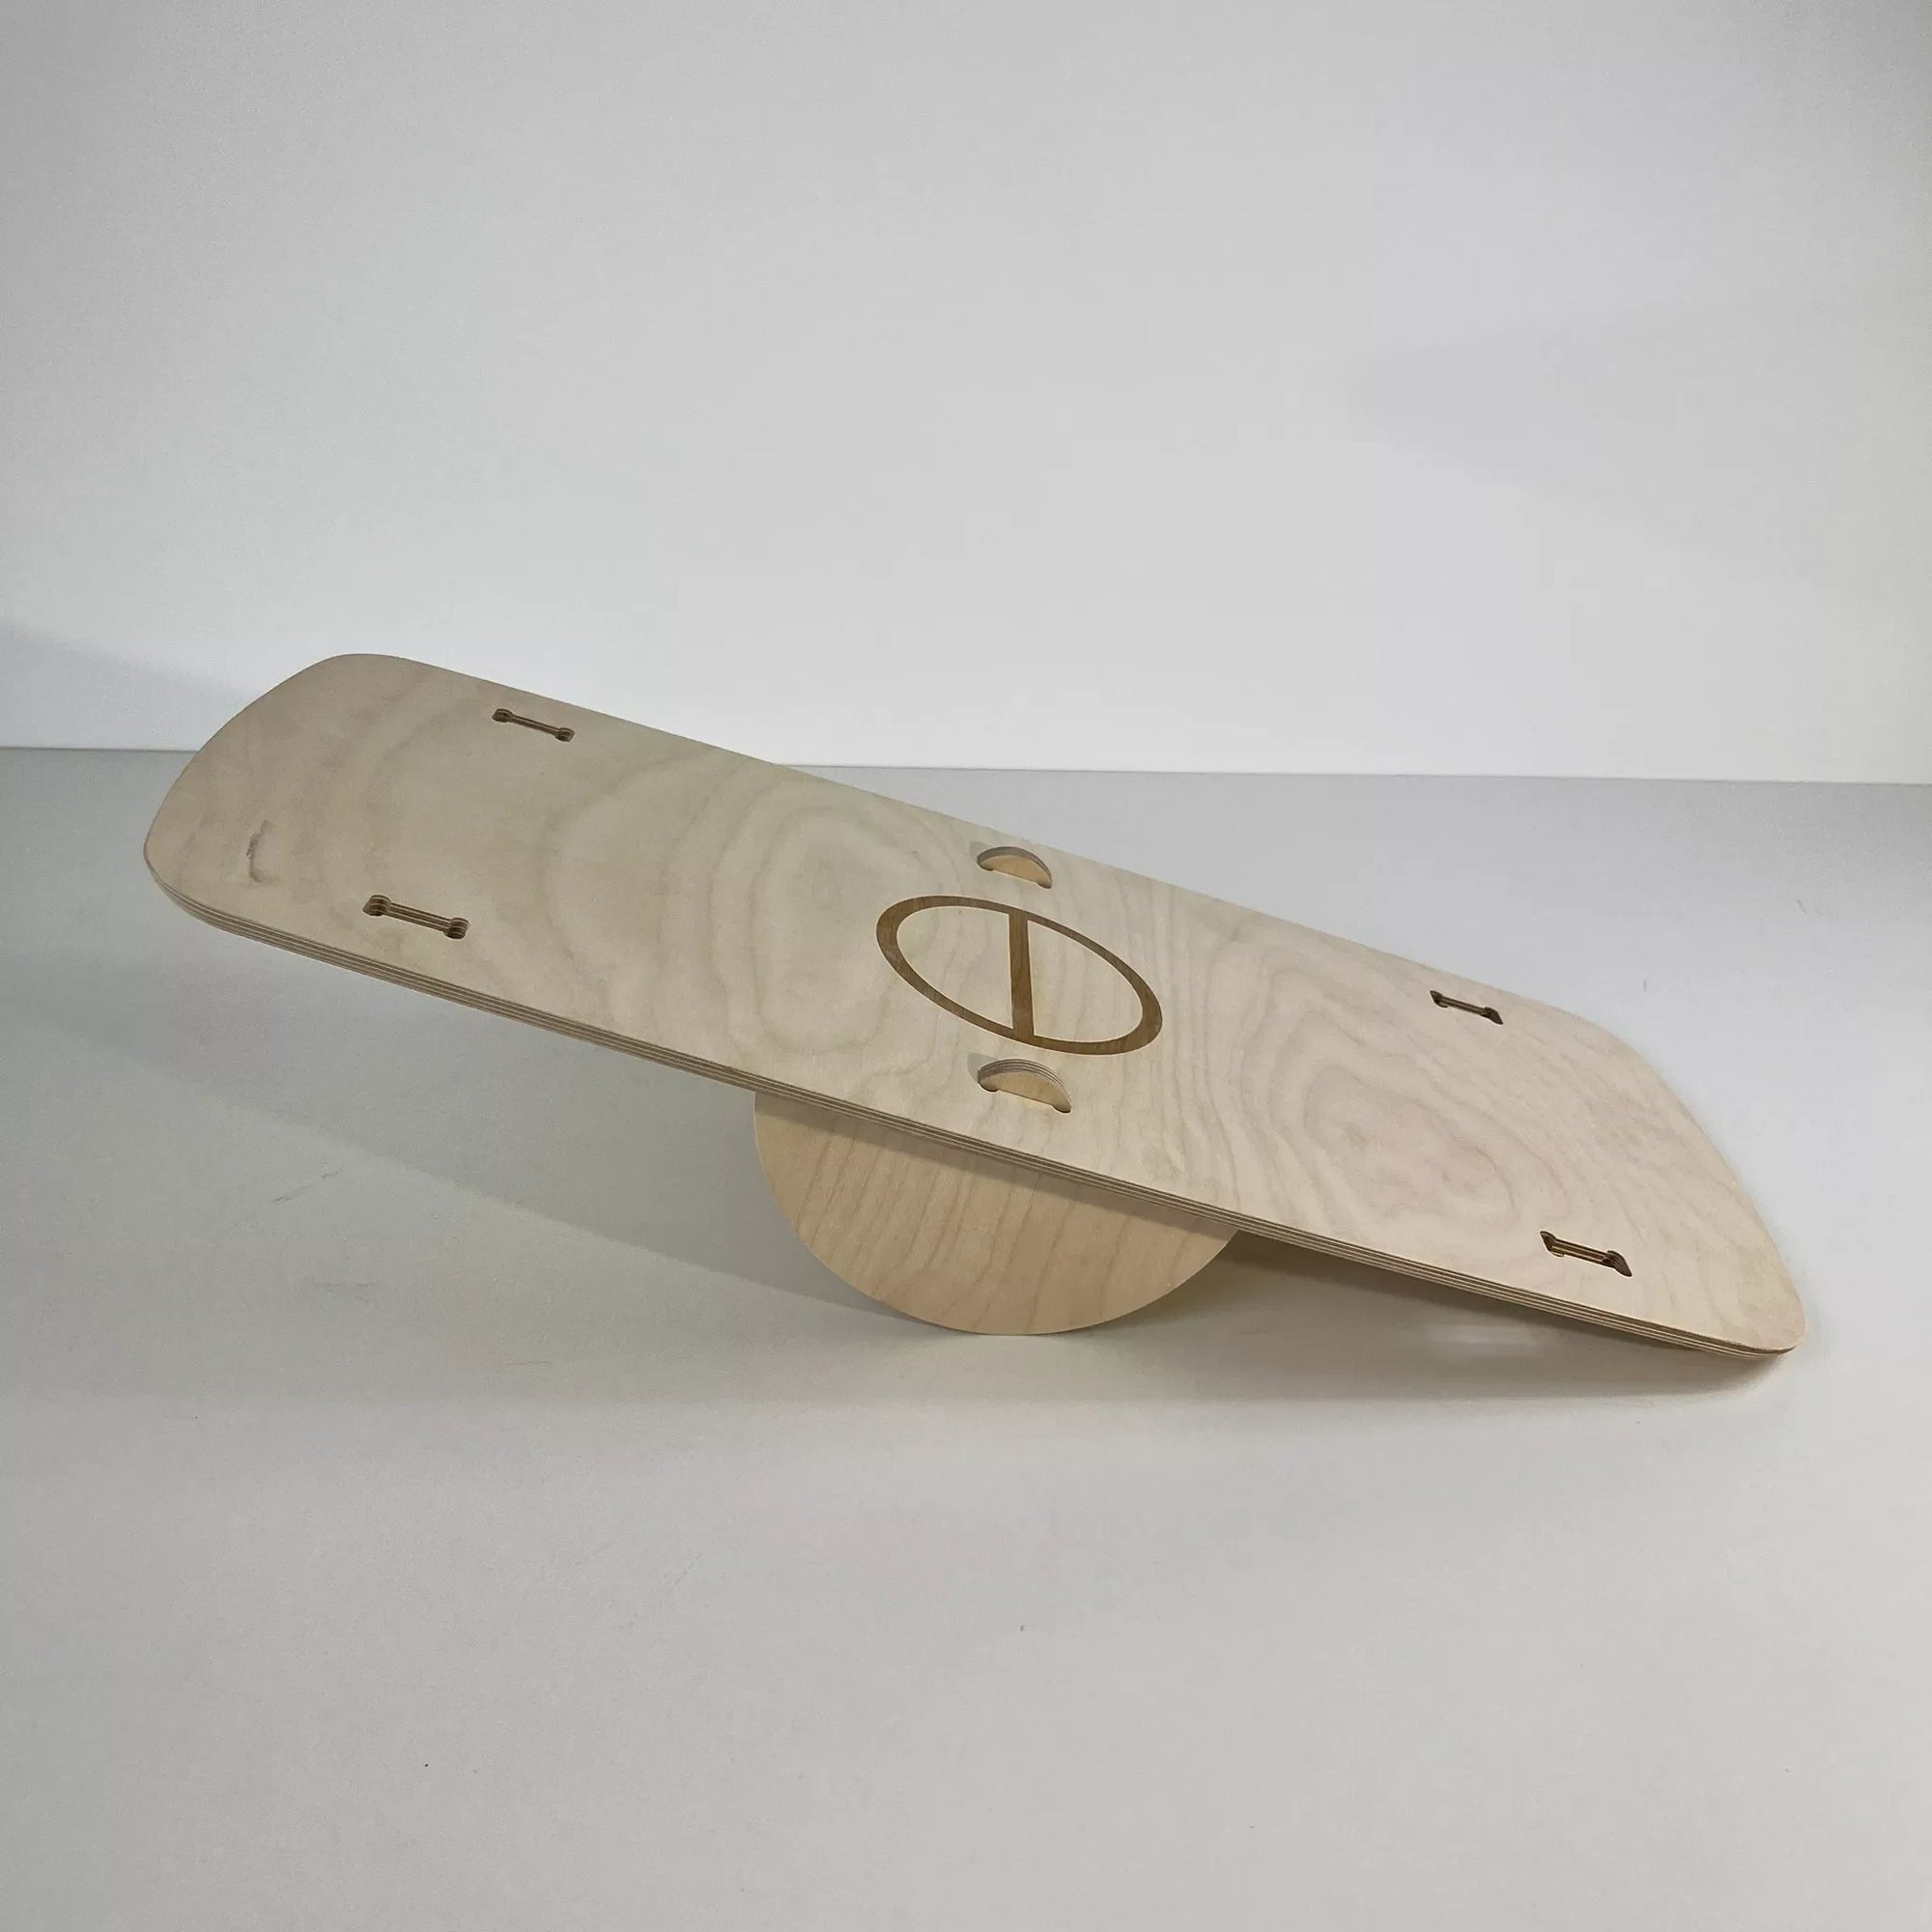 Why You Should Buy a Wooden Balance Board